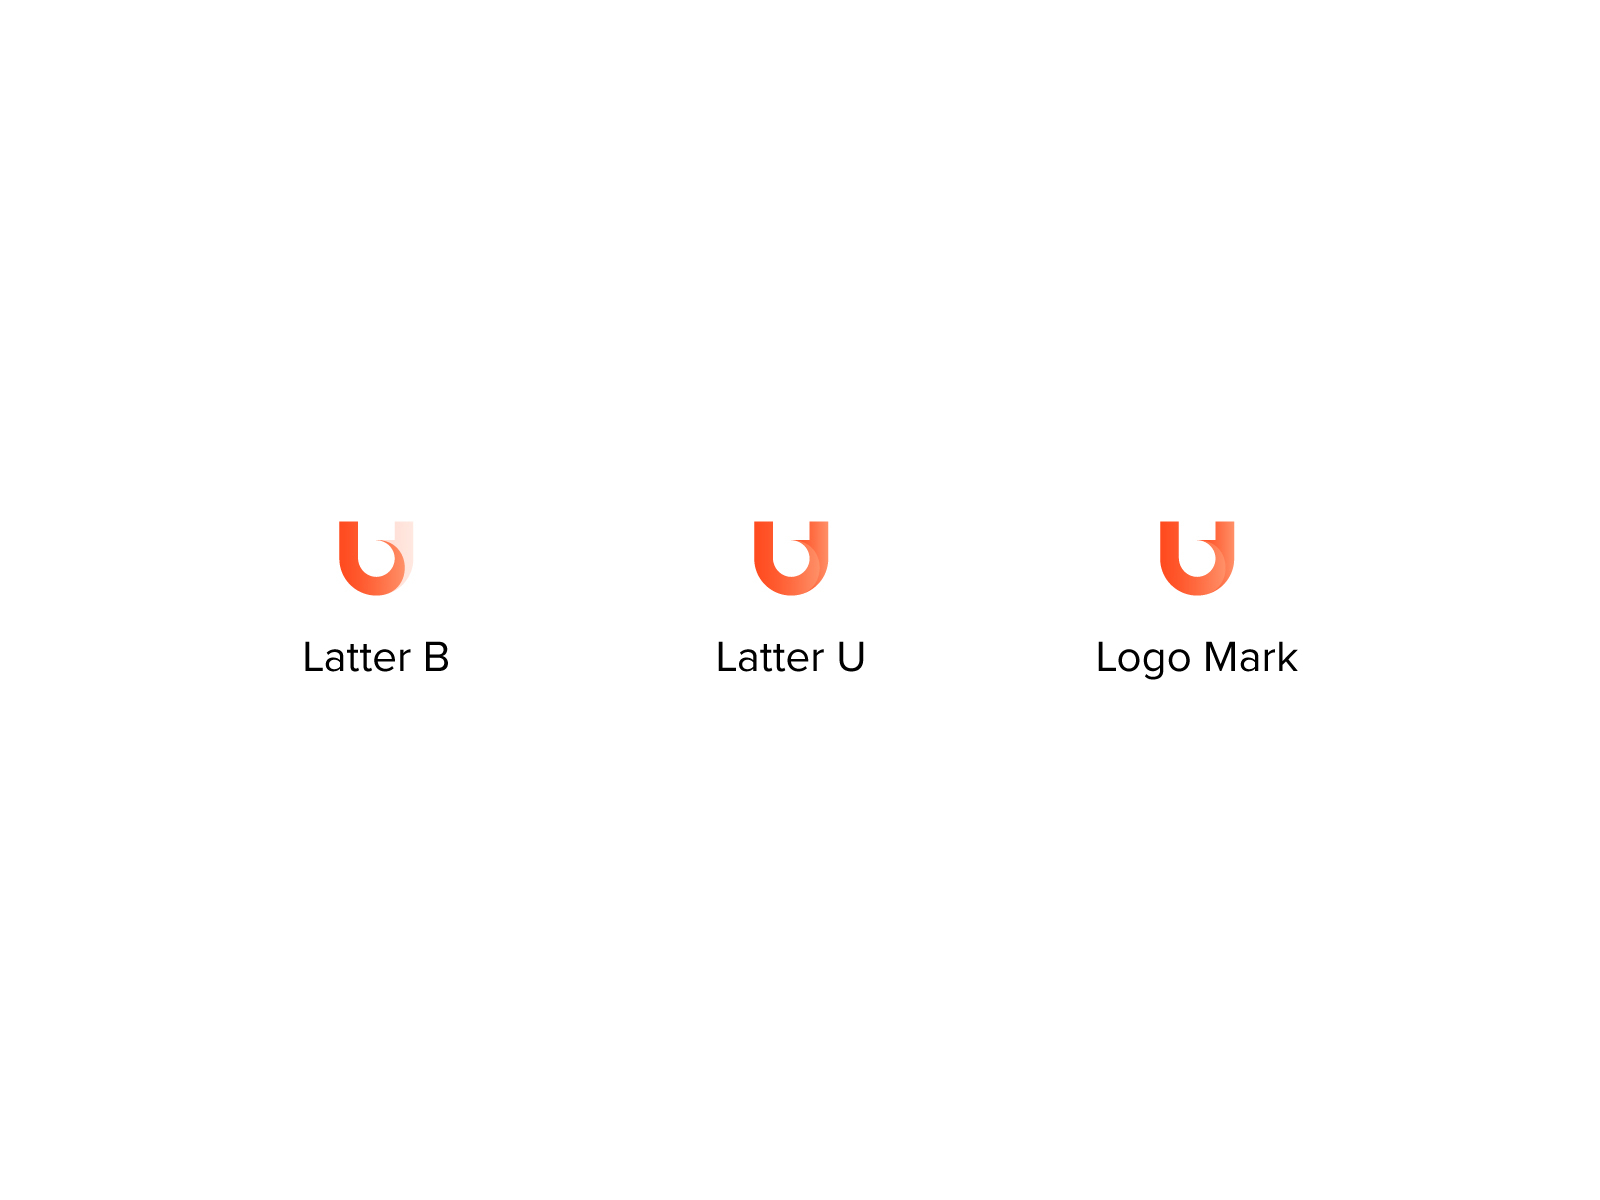 Ueabor Logo Design by Md Mehedi Hasan for Fixdpark on Dribbble